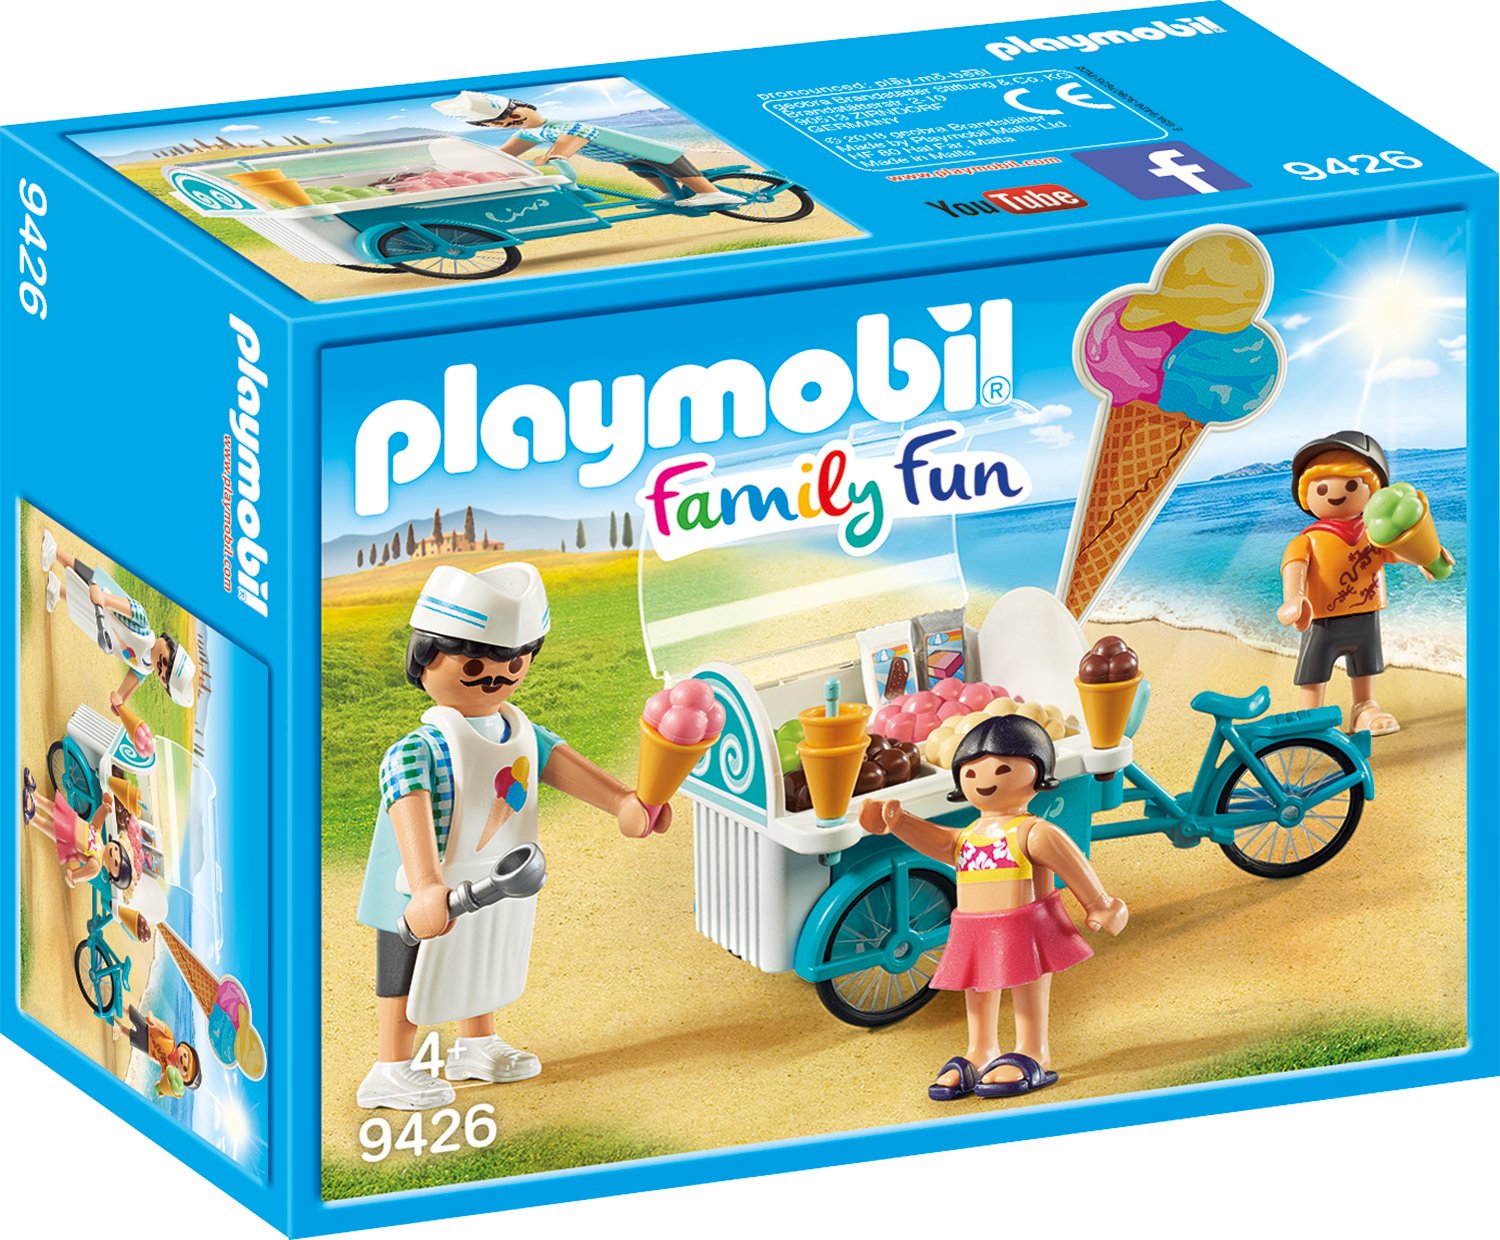 Playmobil Bicycle With Ice Cream Van Game